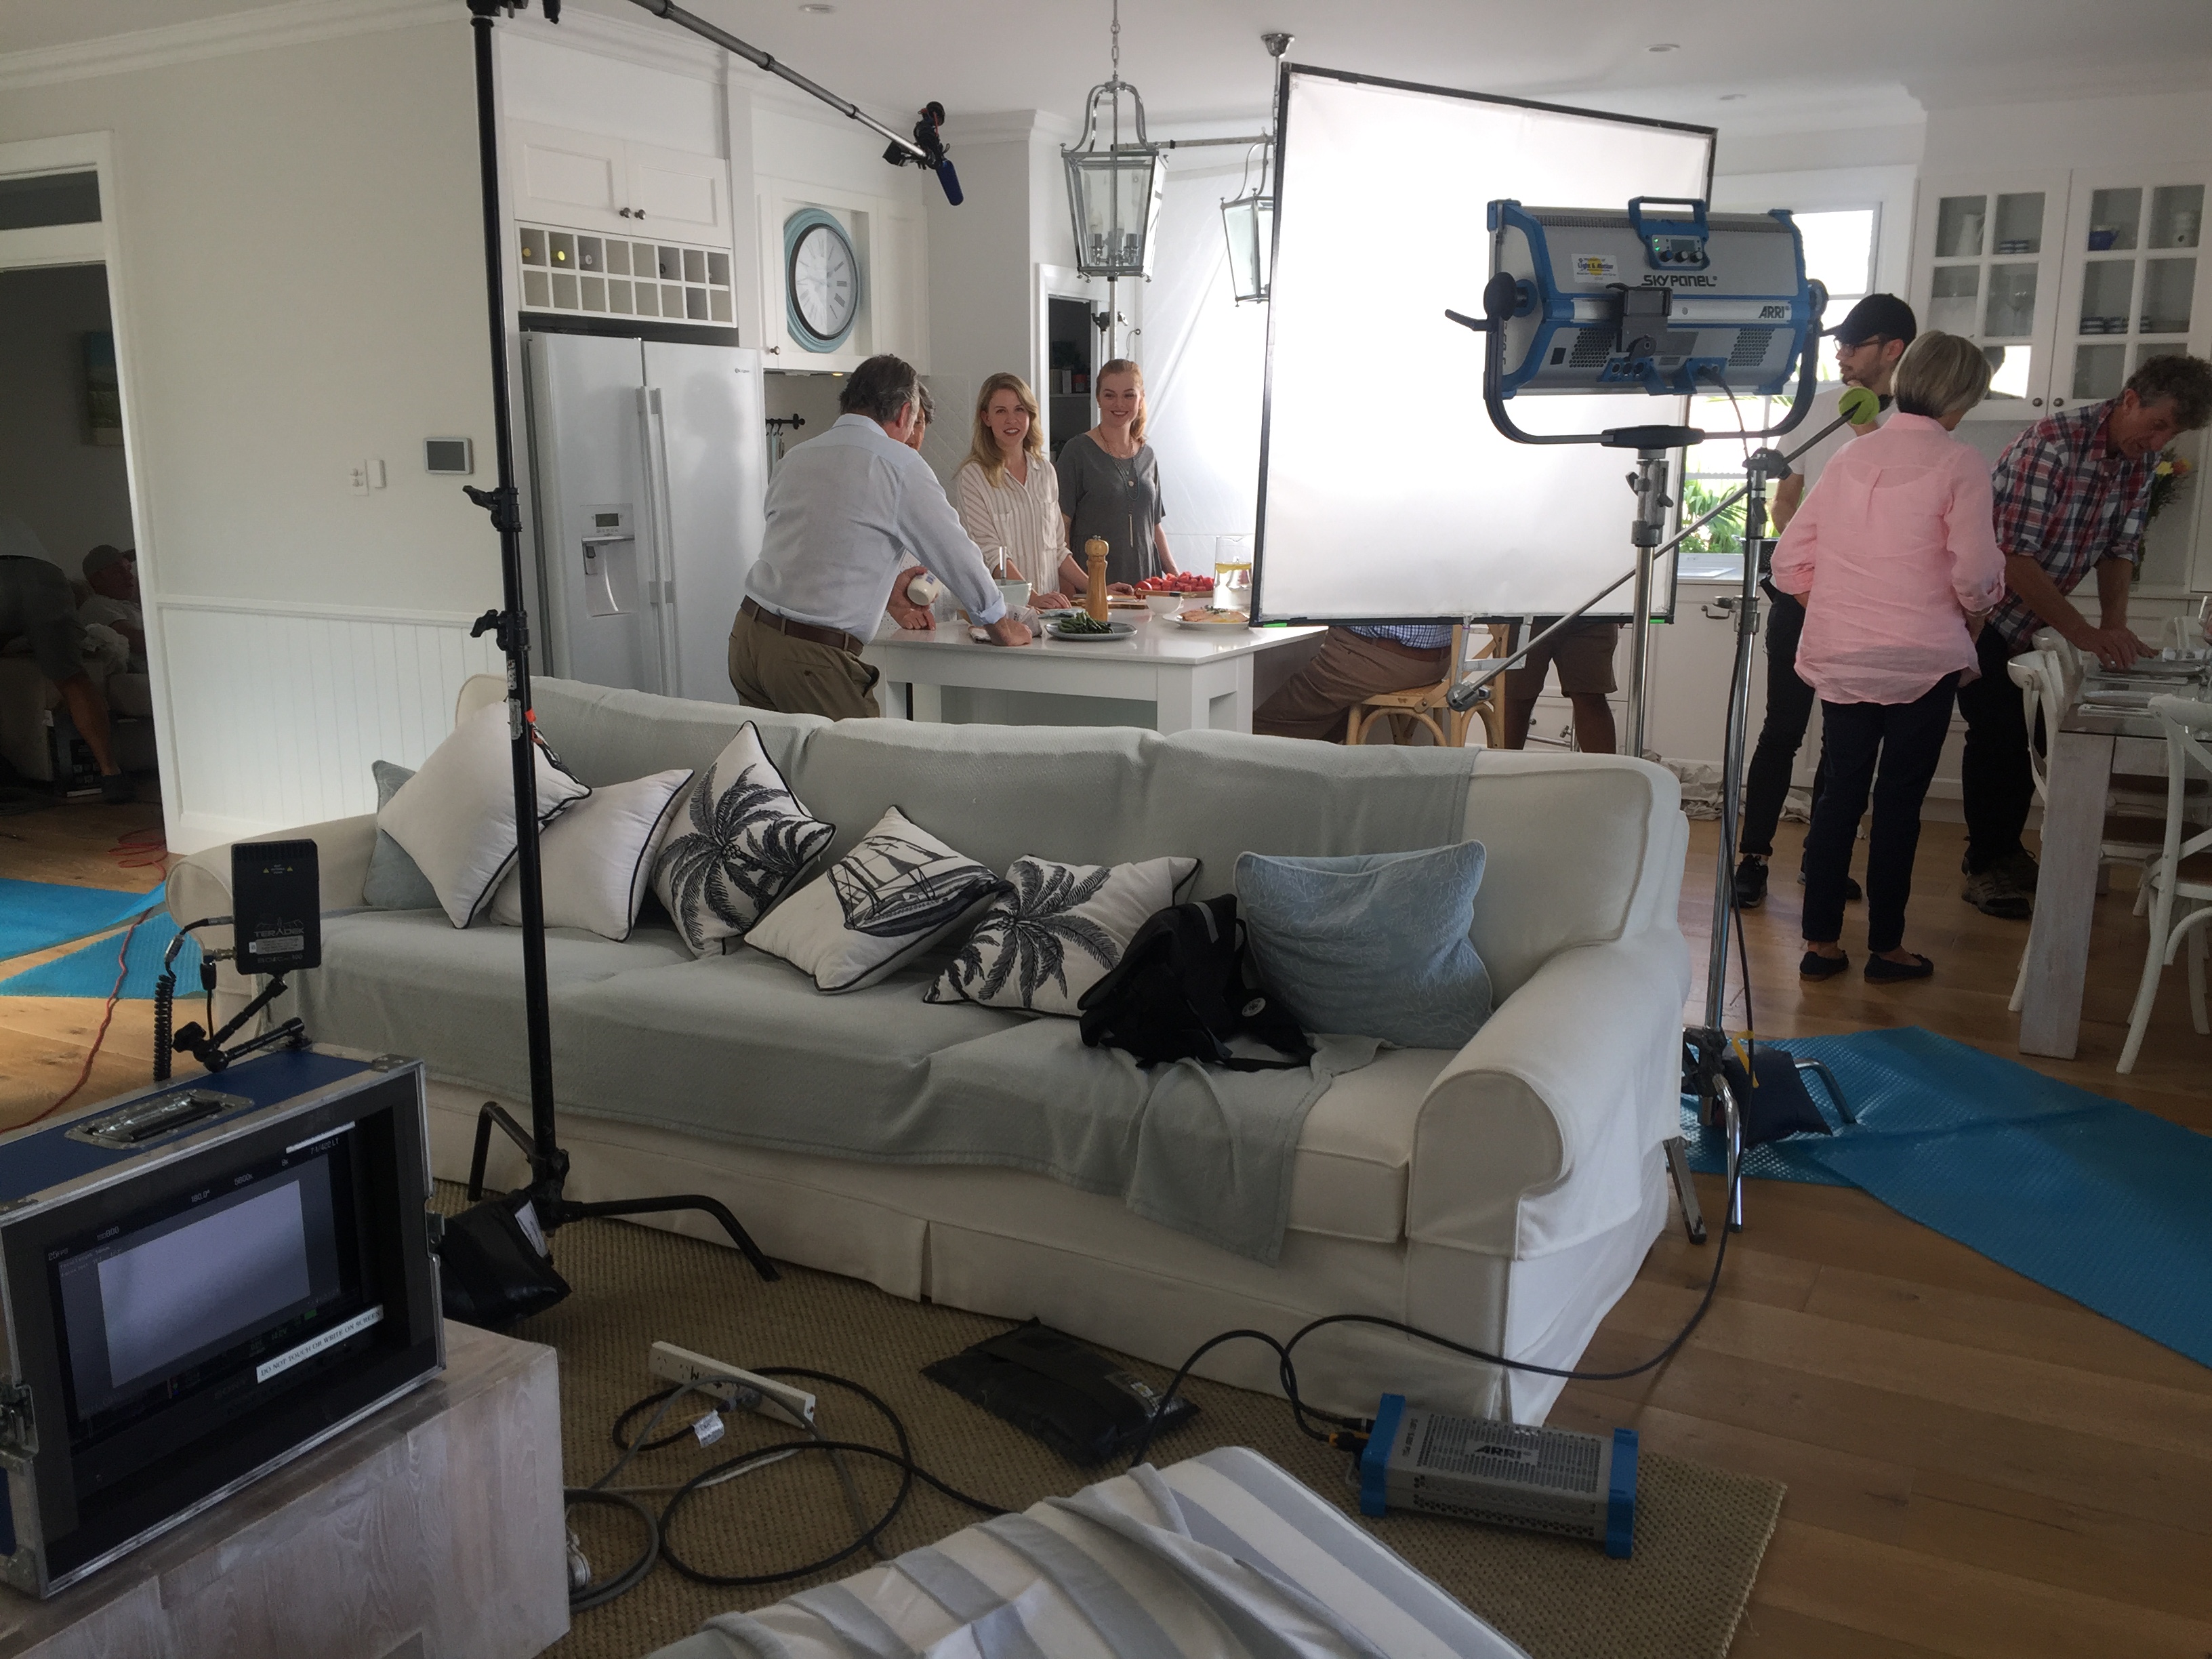 Filming of Aveo Journey campaign inside house with people standing around kitchen bench